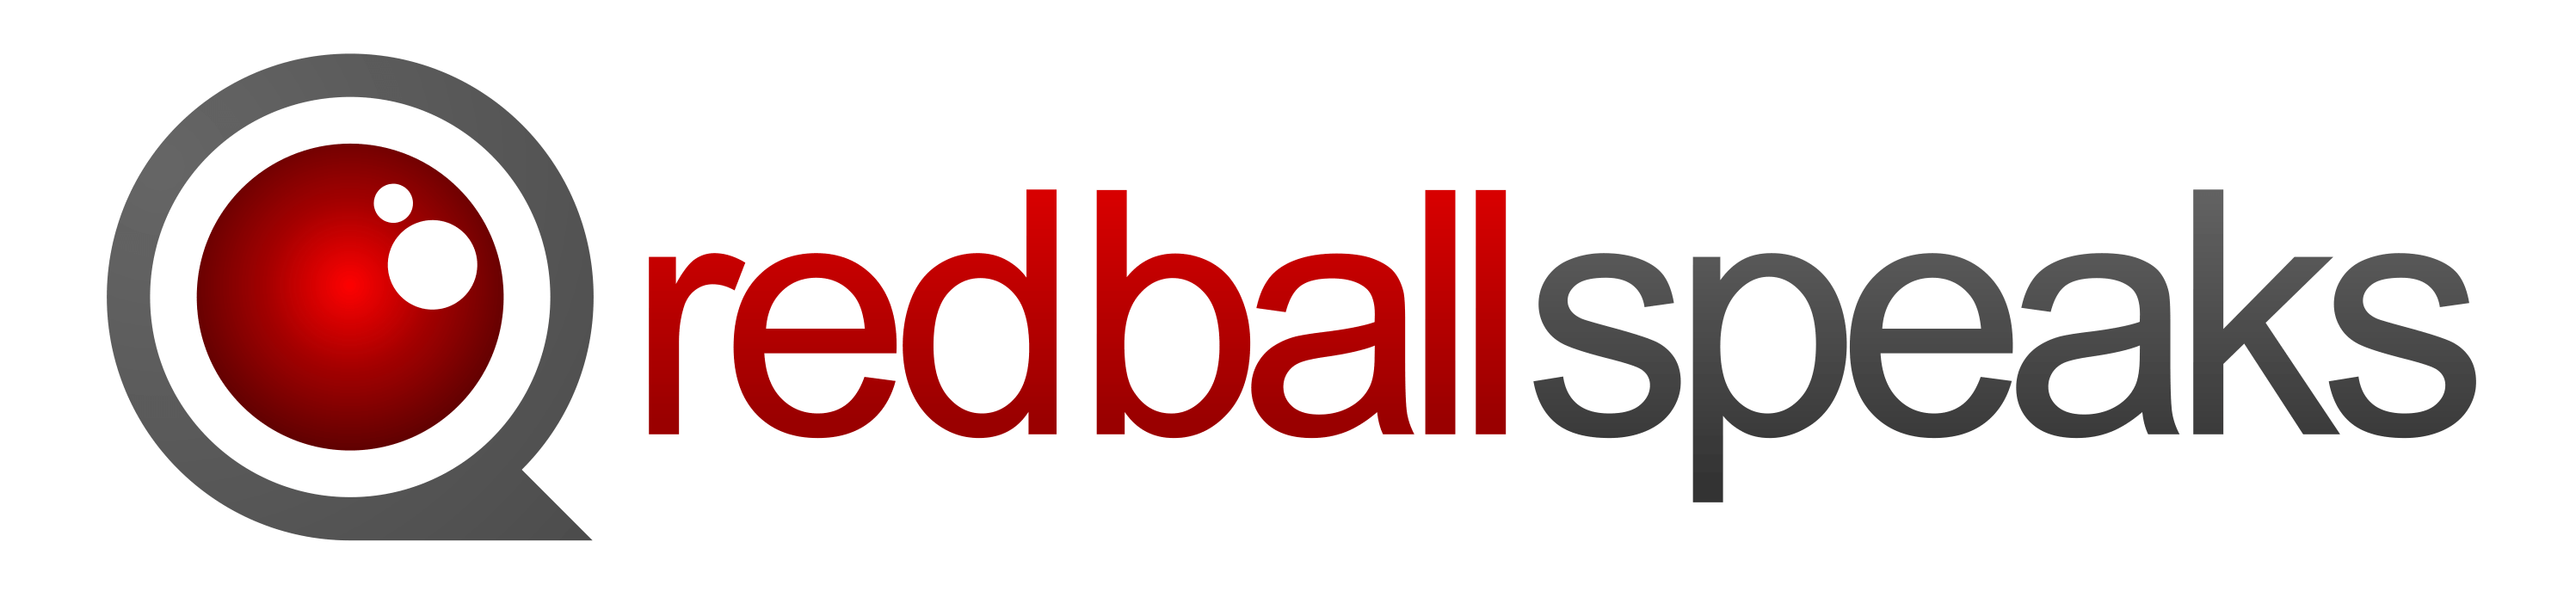 Red Ball Brand Logo - Go ahead ladies, take up space! – Red Ball Speaks